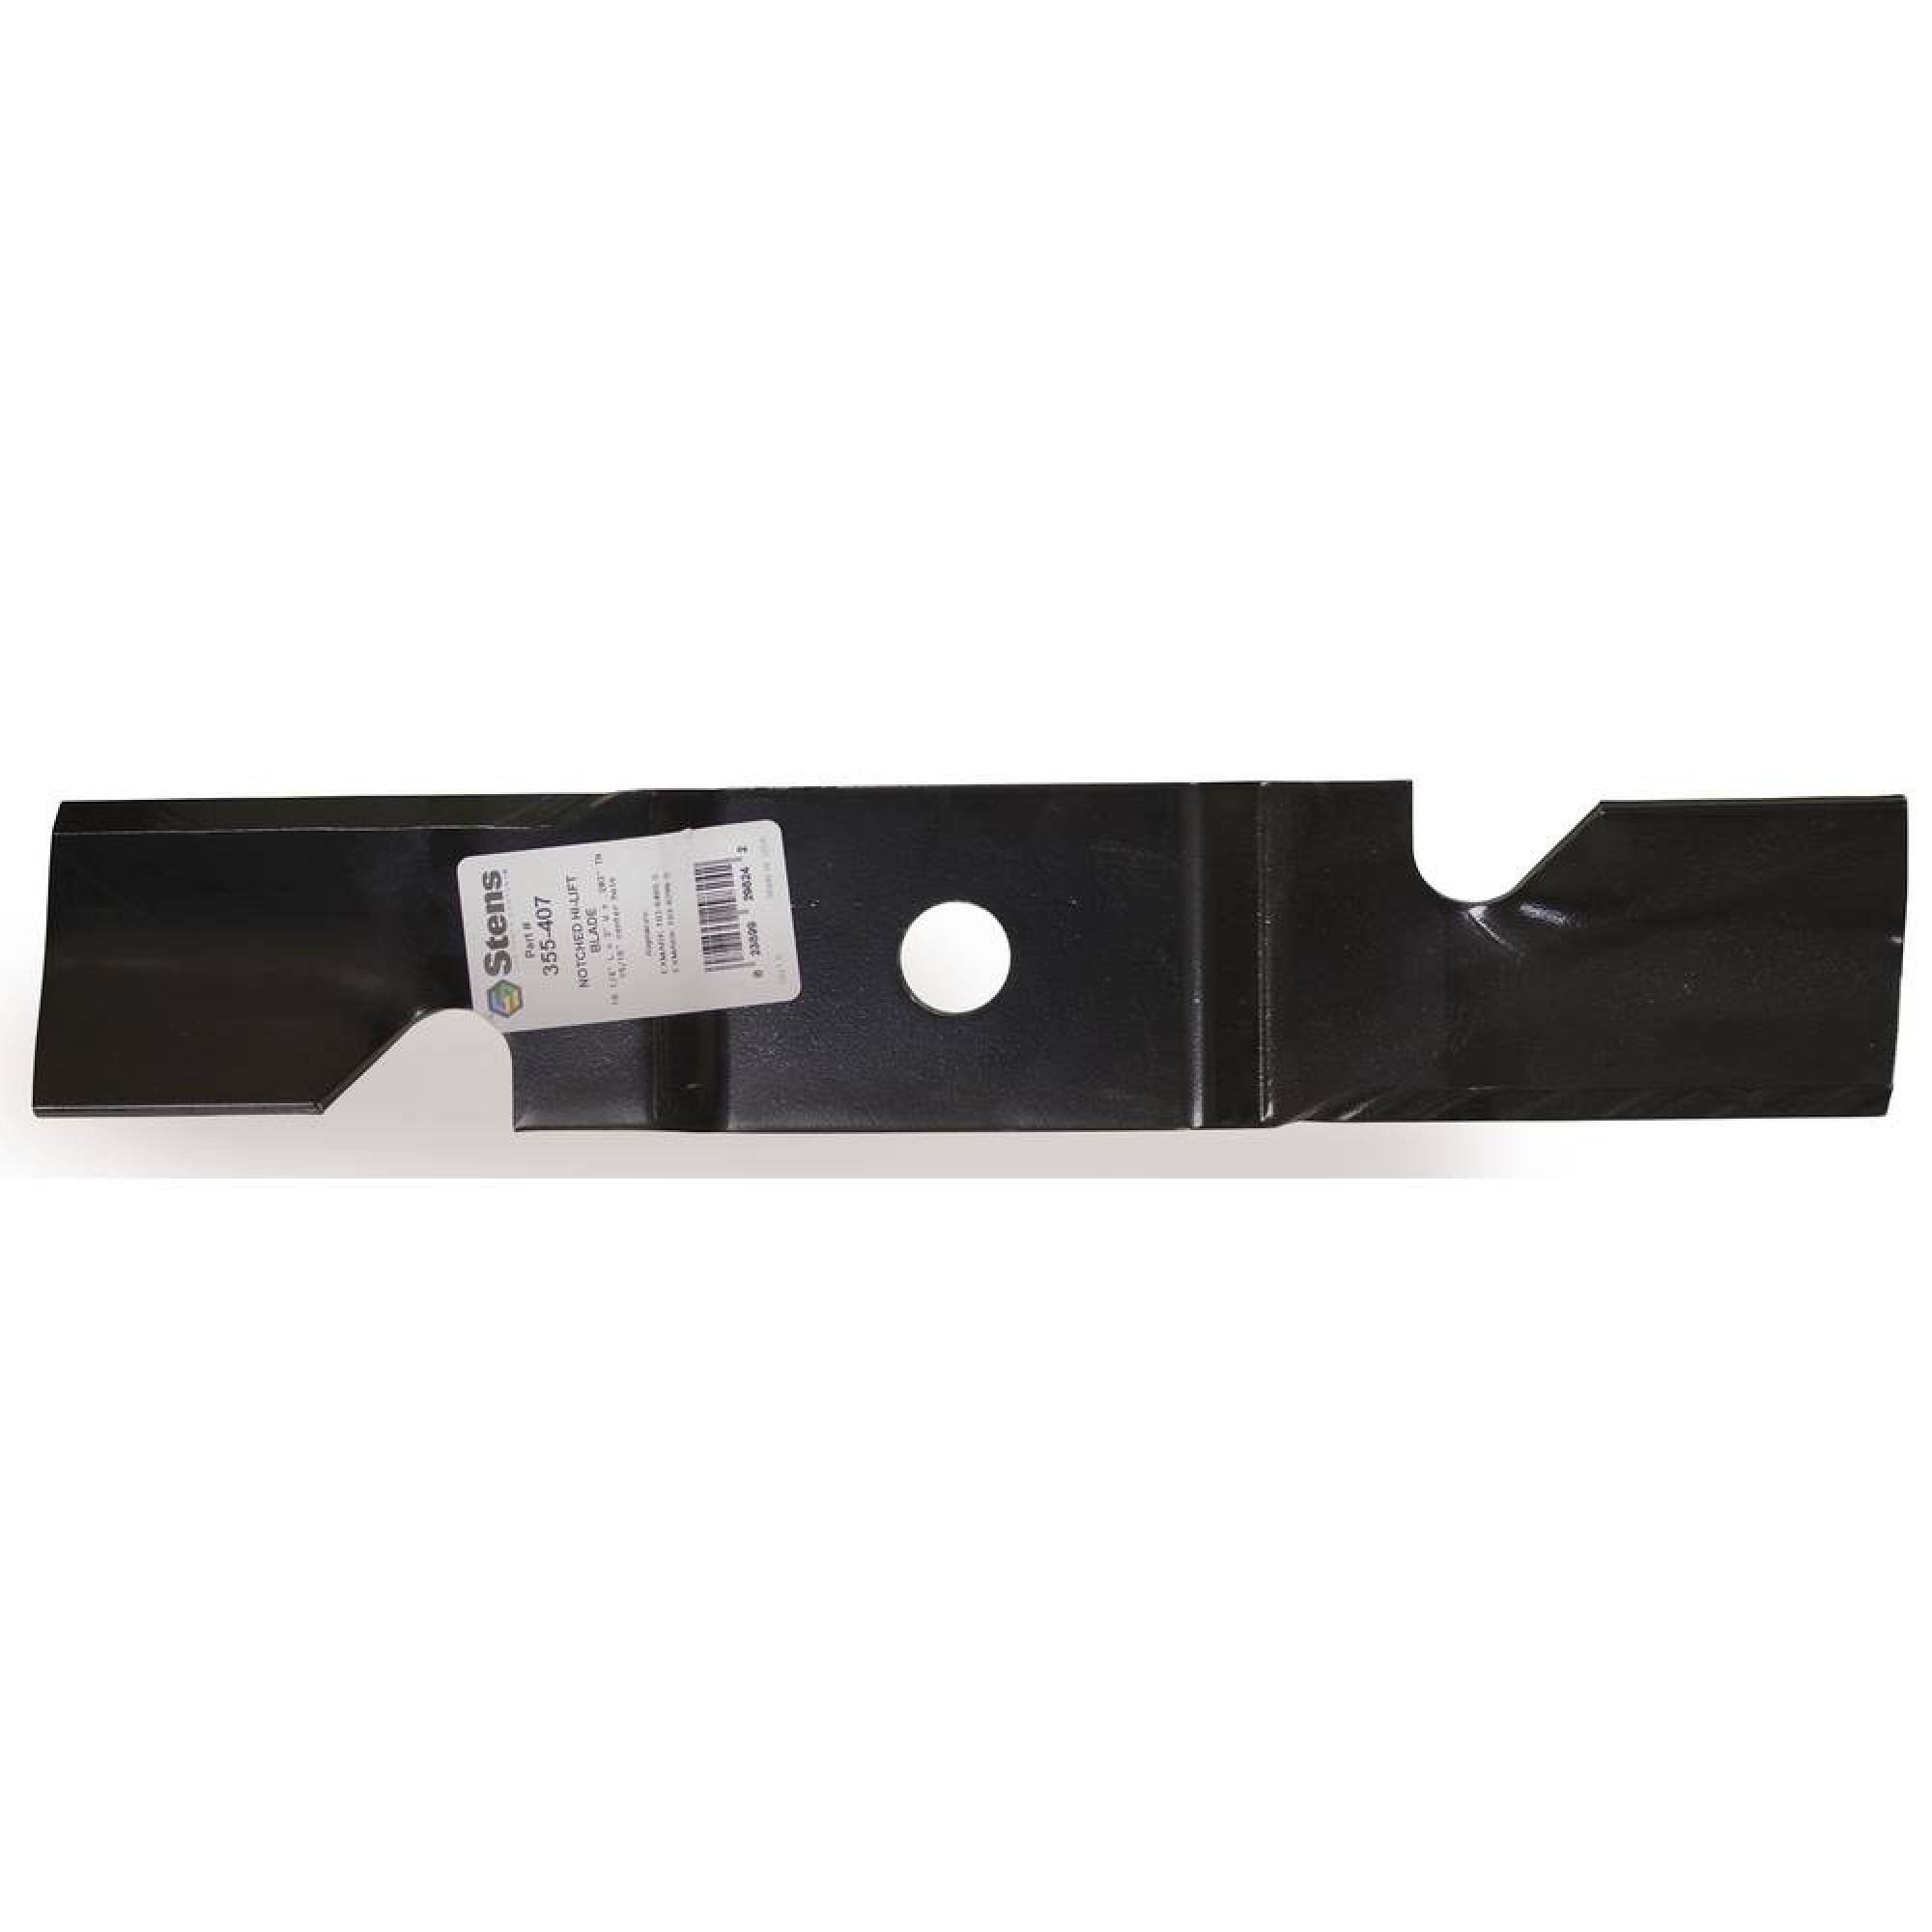 New Stens Notched Hi-Lift Blade 355-407 for Exmark 109-6460-S - image 1 of 2